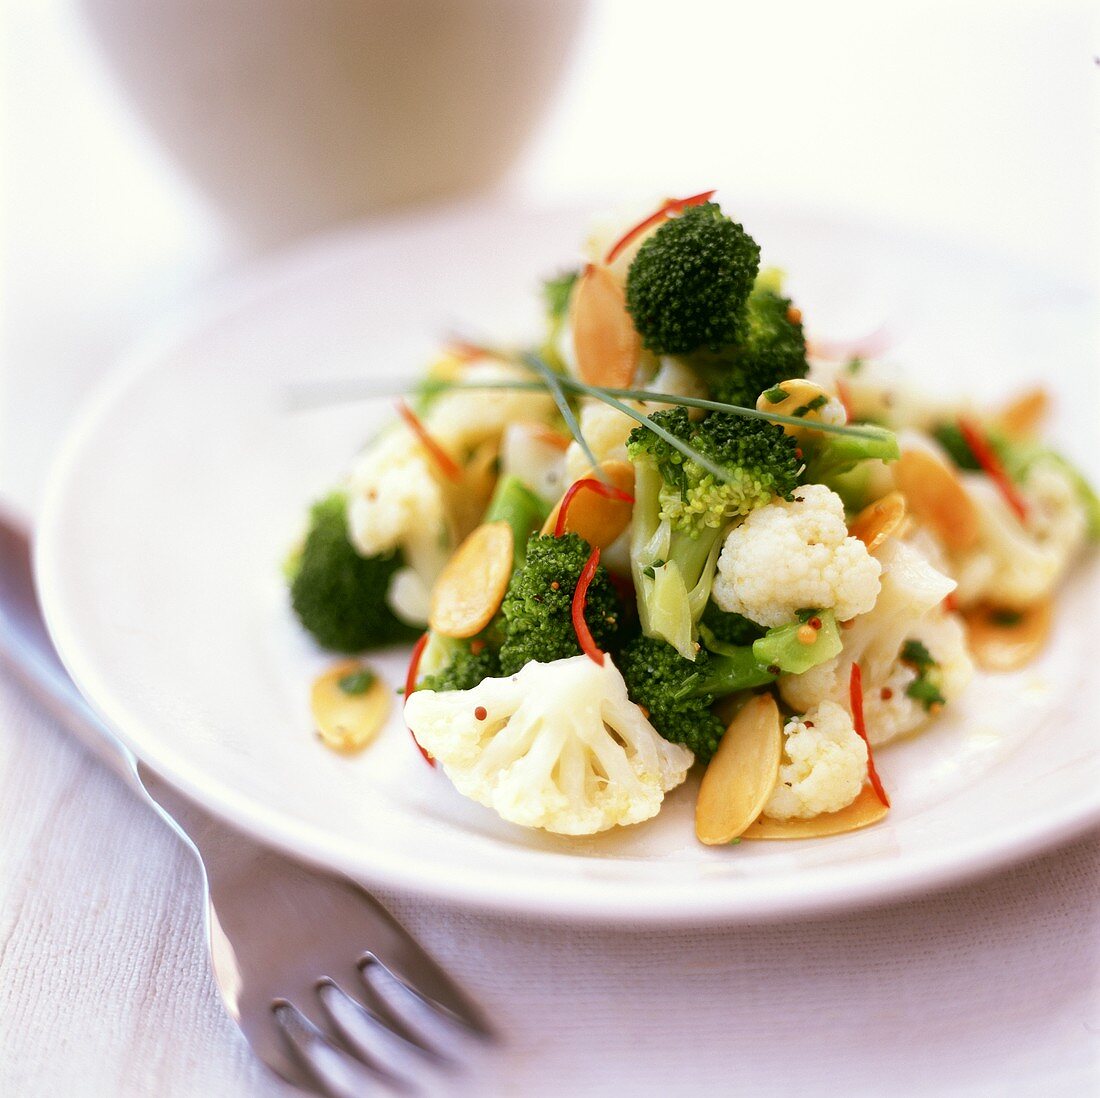 Steamed vegetables with almonds